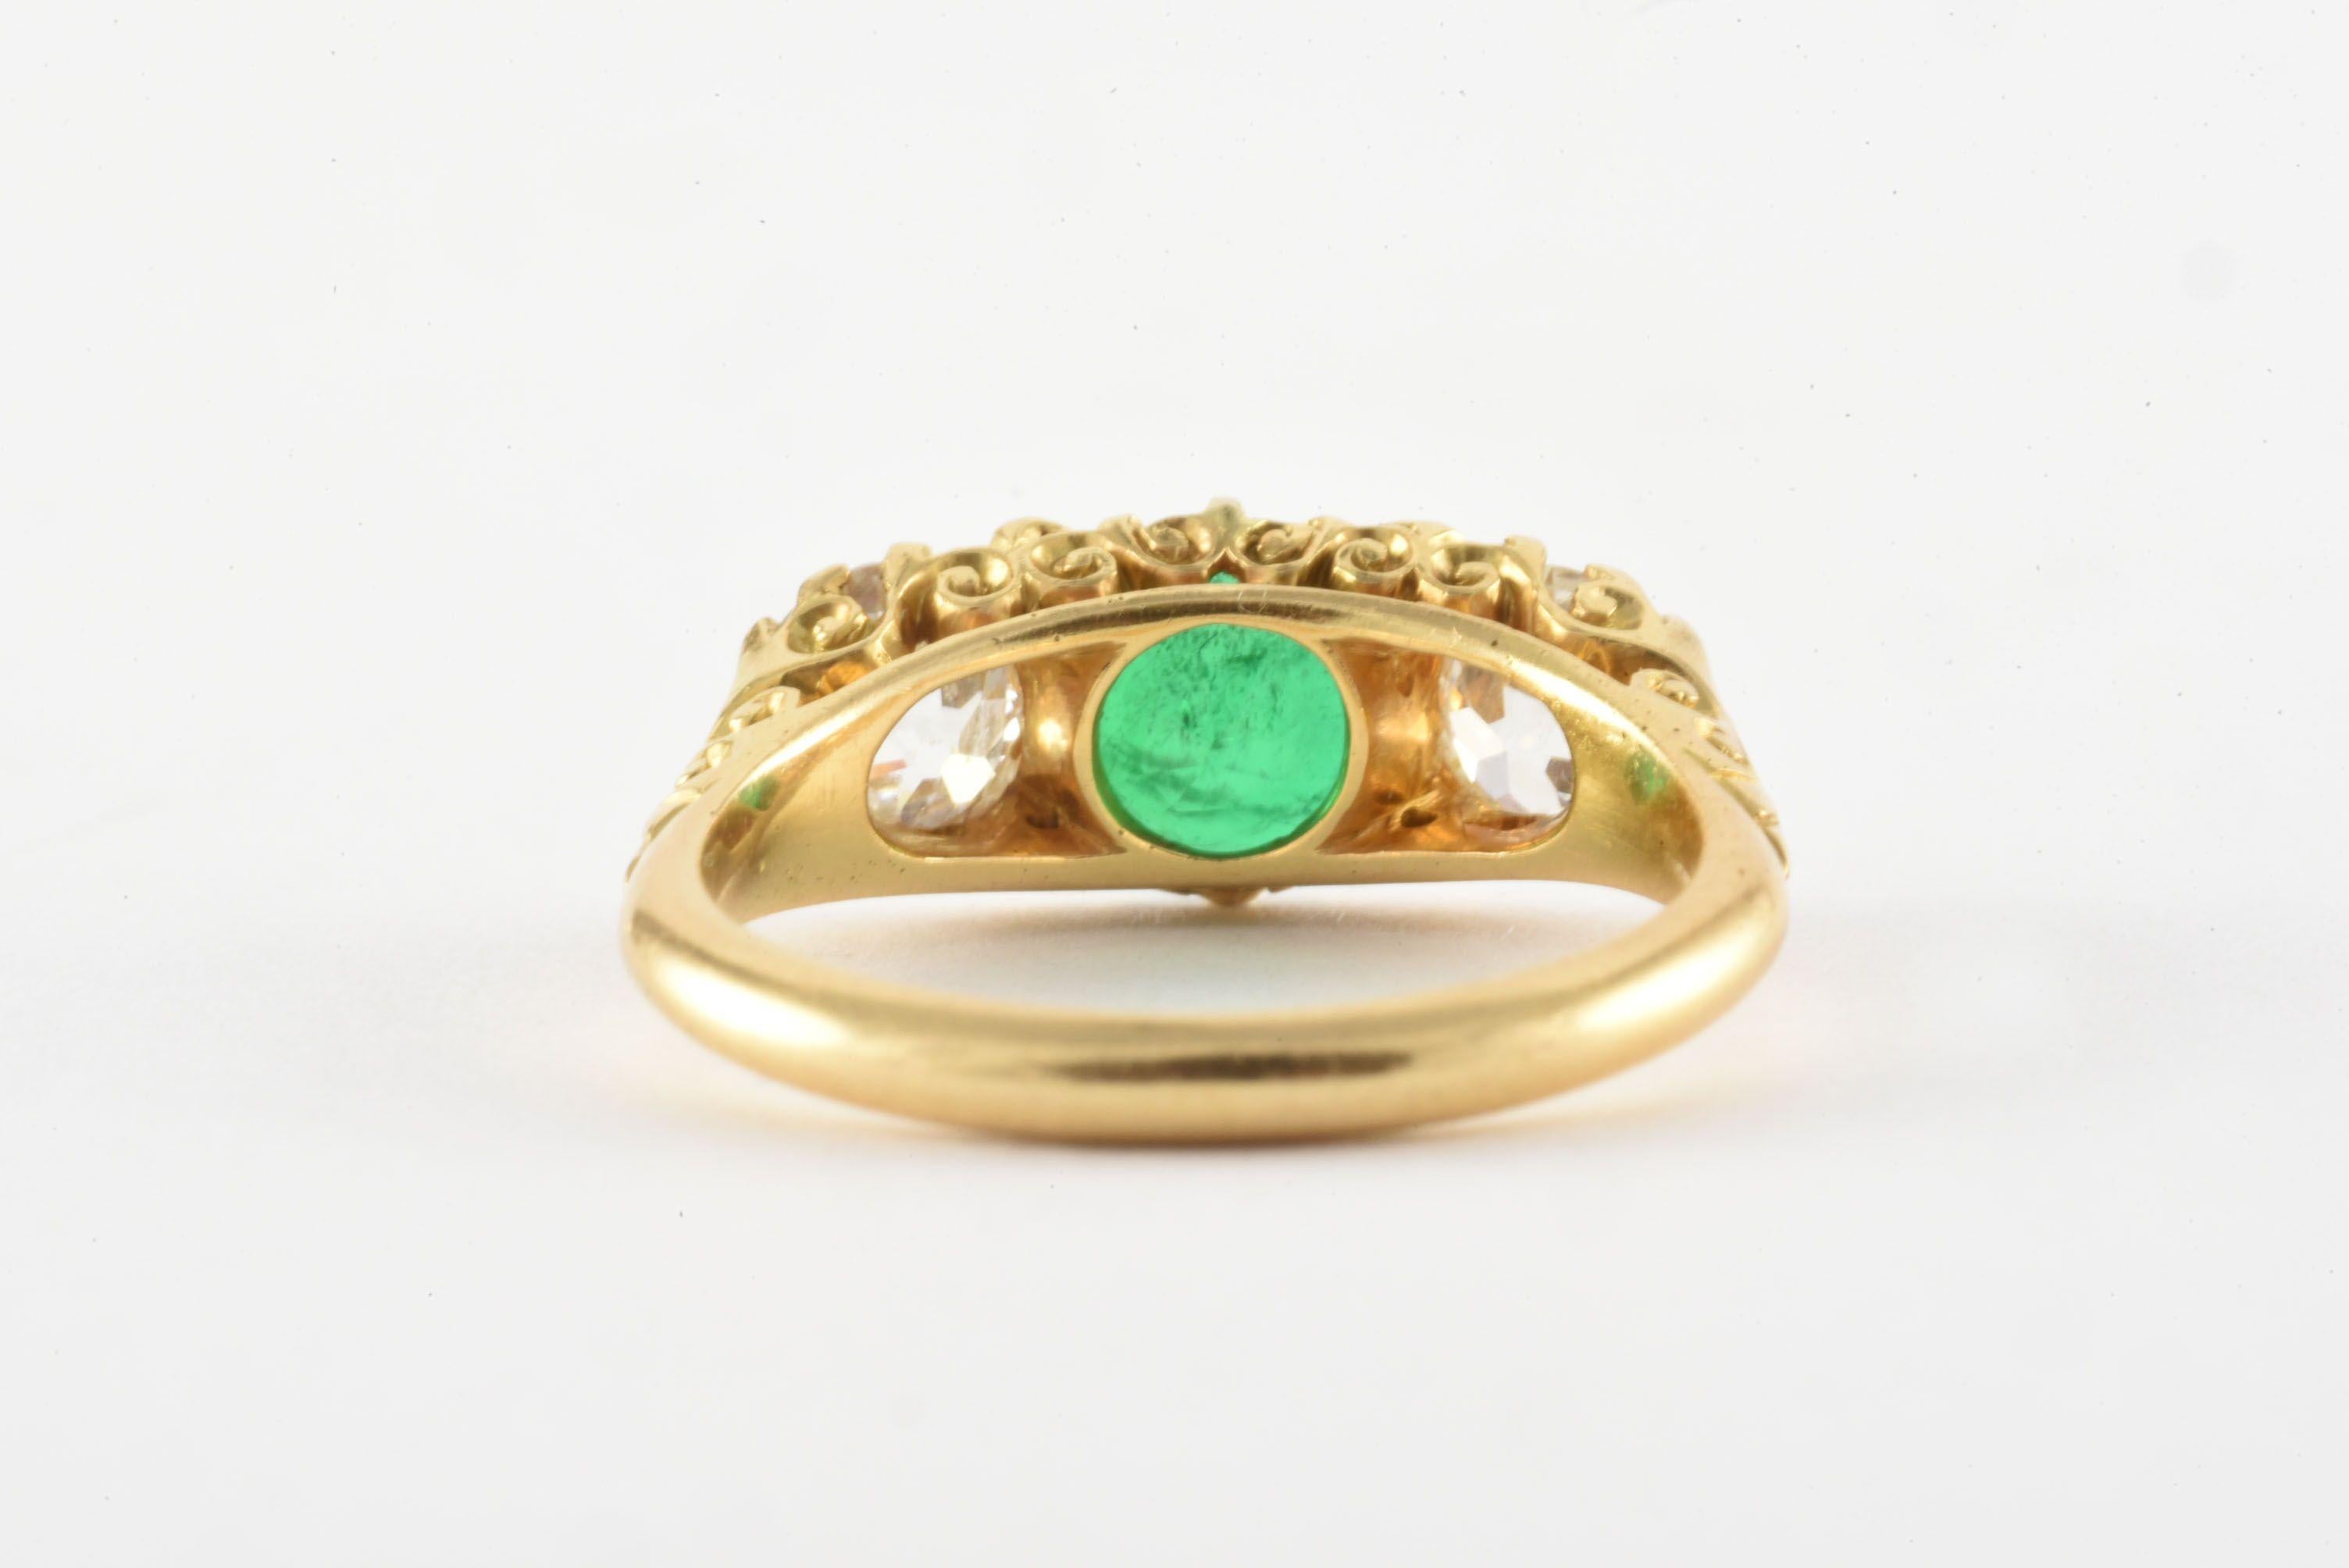 A vibrant natural green round-shaped emerald is flanked by two Old Mine cut diamonds totaling 1.25 carats, F-G color, VS-SI clarity, in this dazzling Victorian Era three-stone band crafted from 18kt yellow gold and accented with scrolling detailed